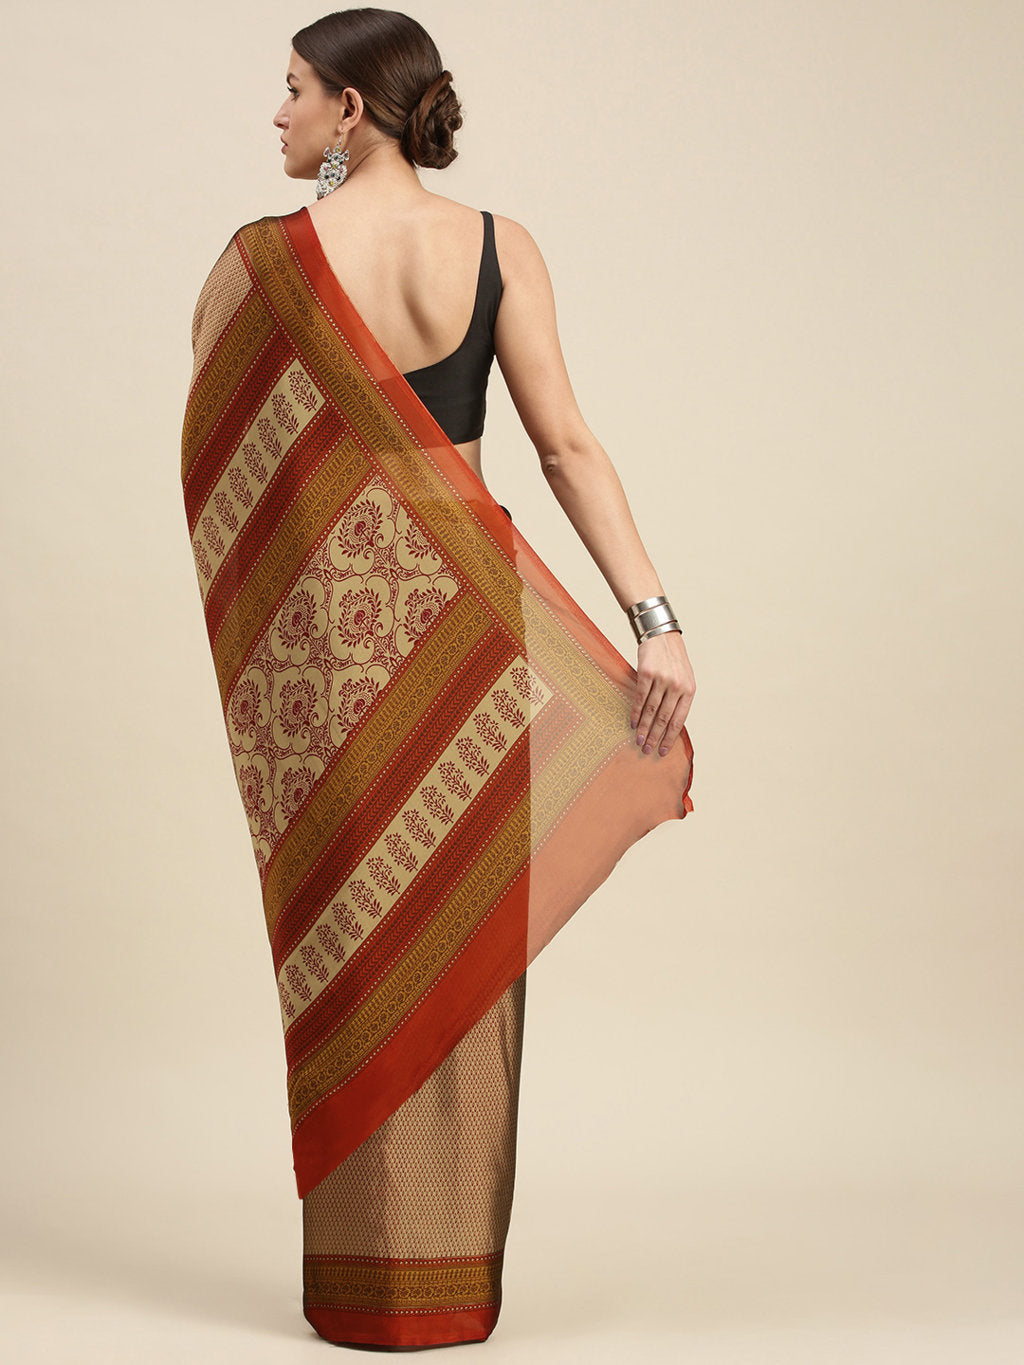 Women's Beige & Red Crepe Printed Daily Wear Saree - Sangam Prints